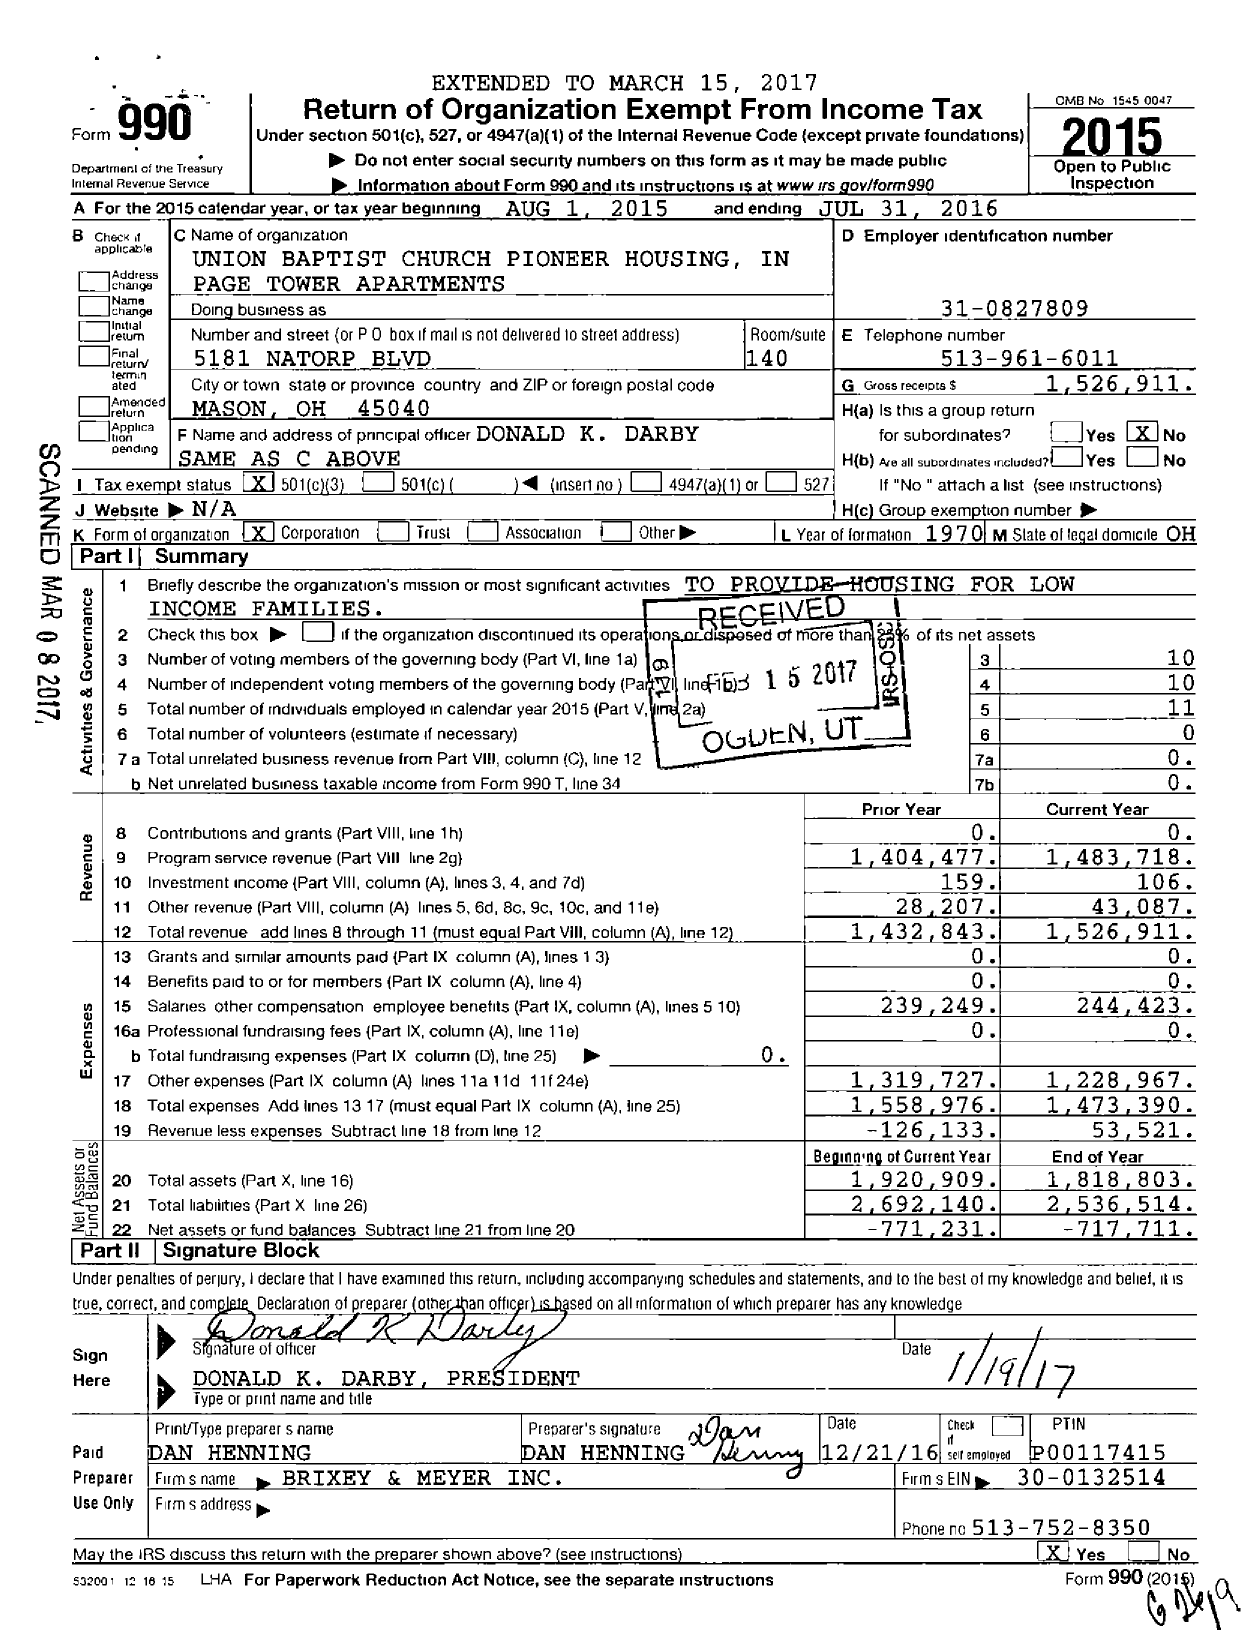 Image of first page of 2015 Form 990 for Union Baptist Church Pioneer Housing In Page Tower Apartments